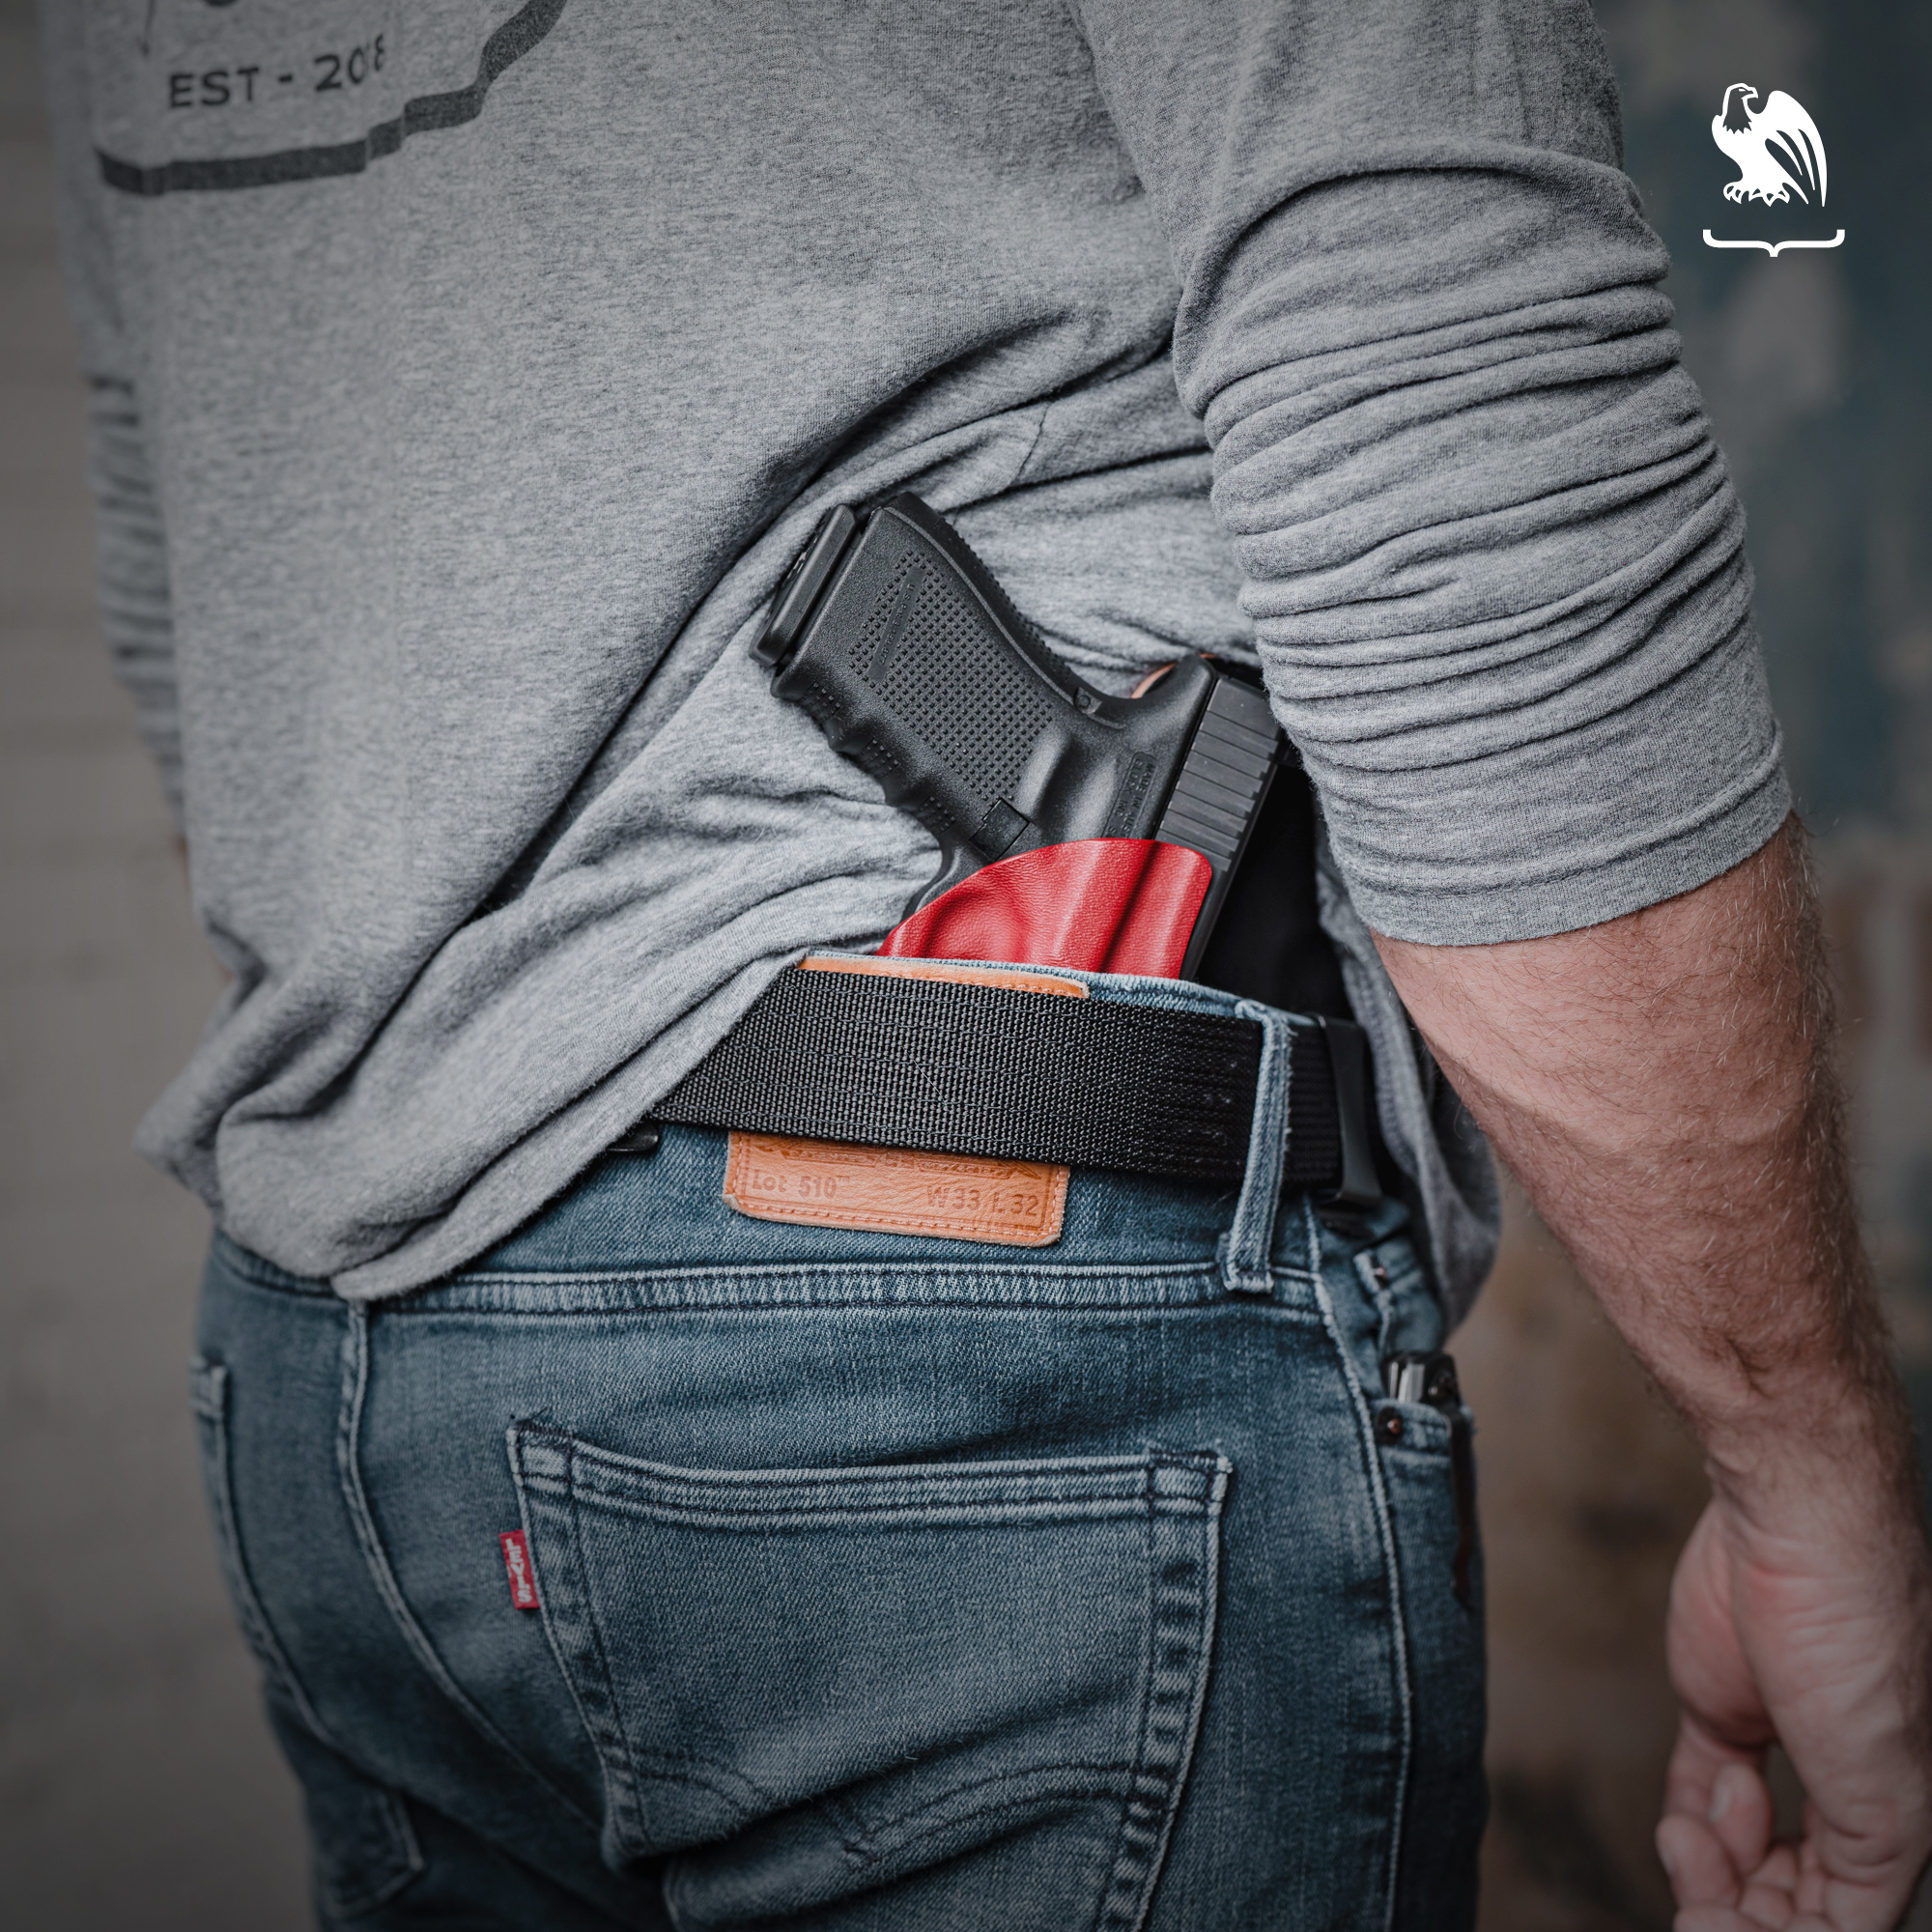 Best Concealed Carry Positions for Different Body Types - Vedder Holsters